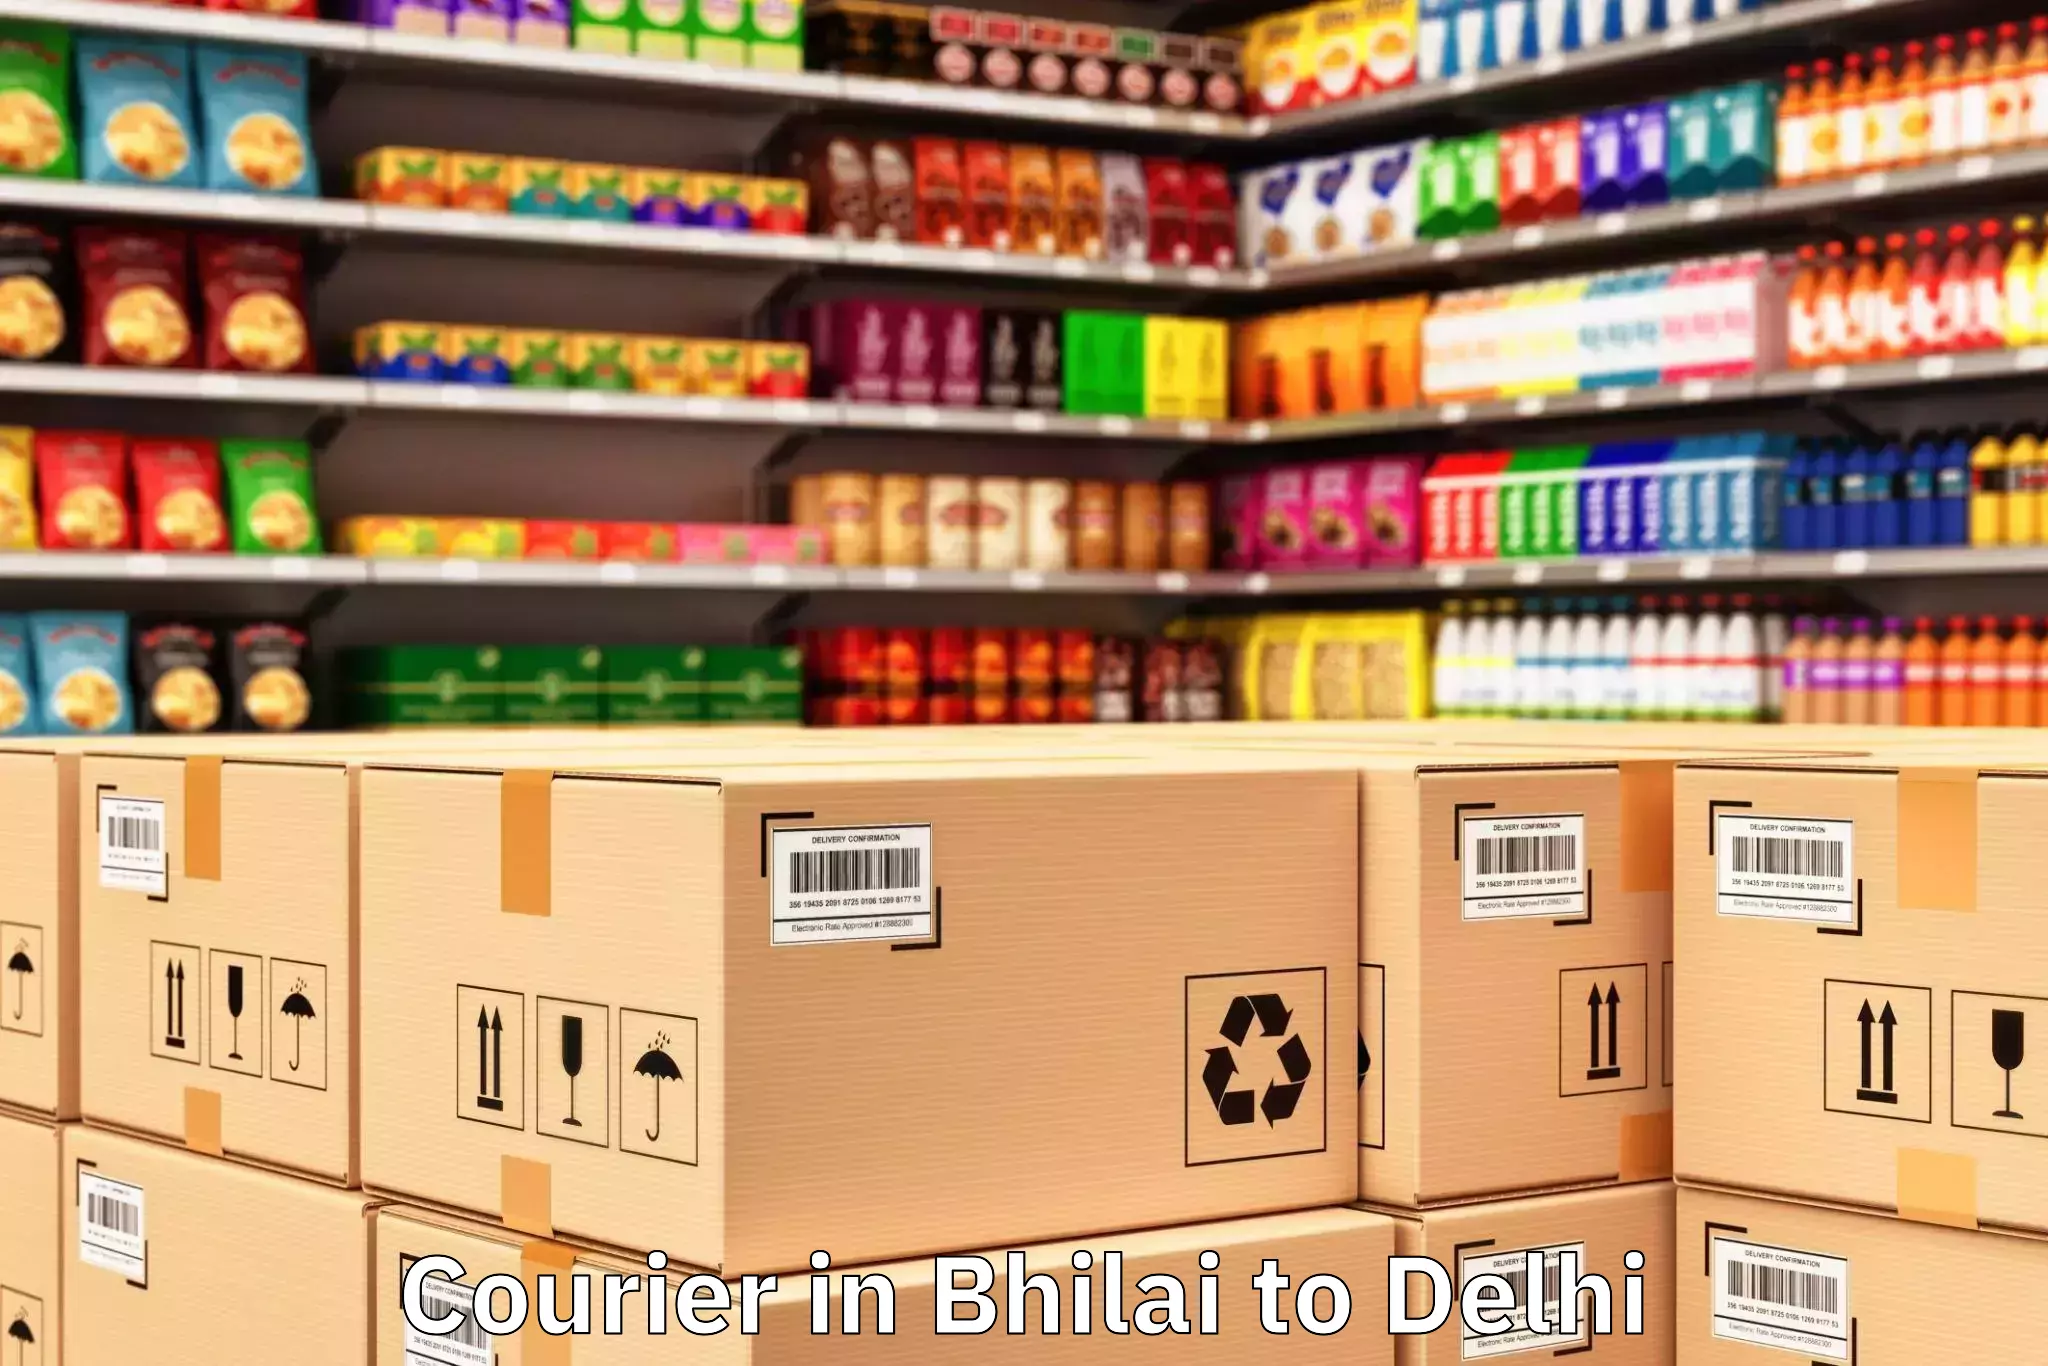 Expert Bhilai to Unity One Mall Rohini Courier